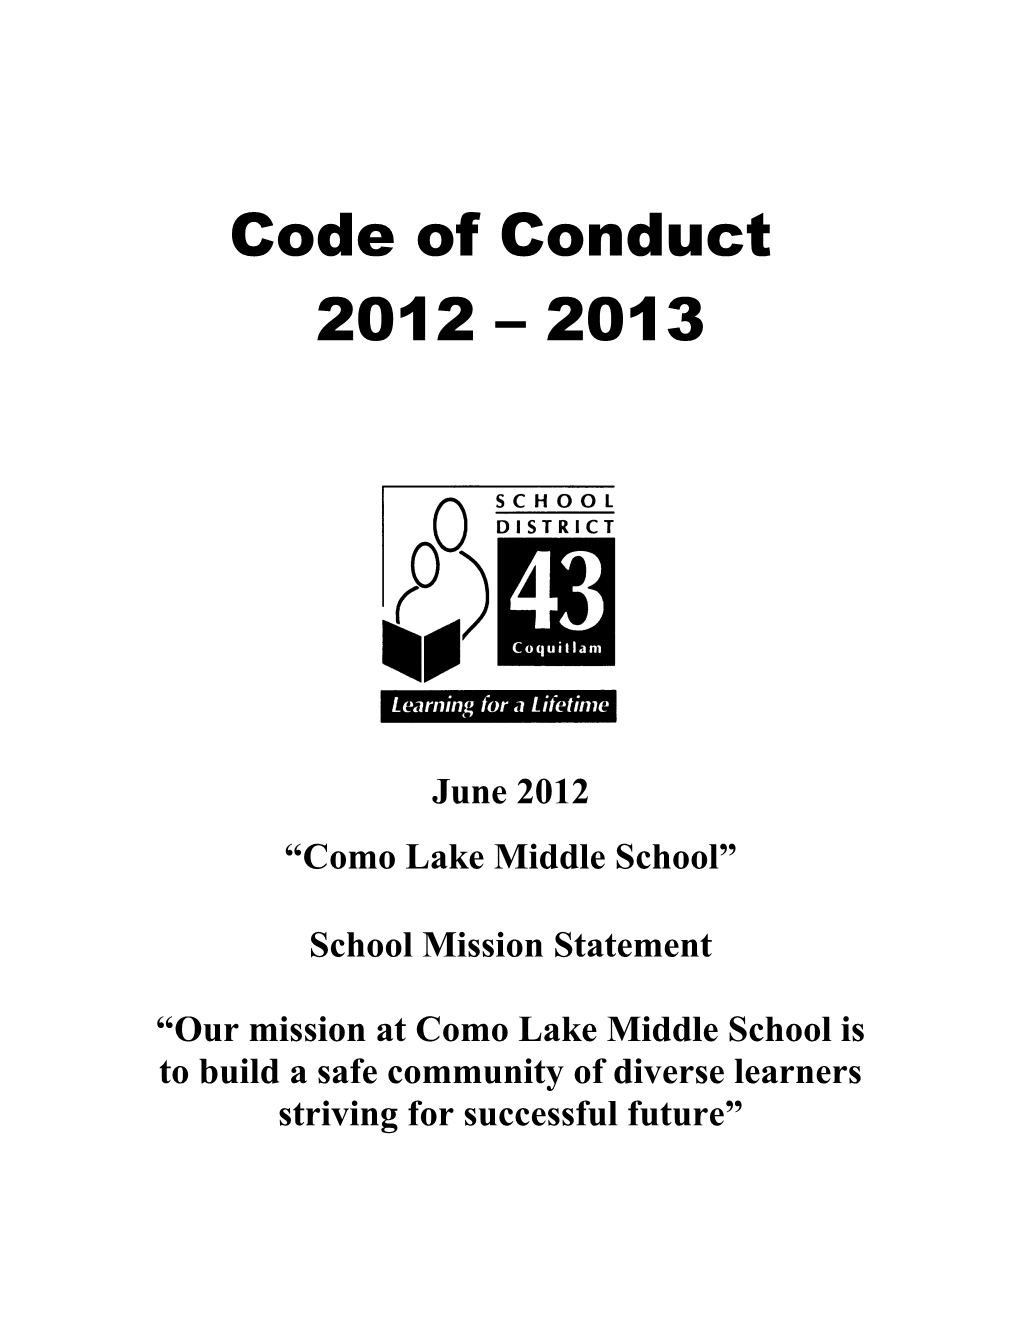 Code of Conduct Guidelines: 2004 2005